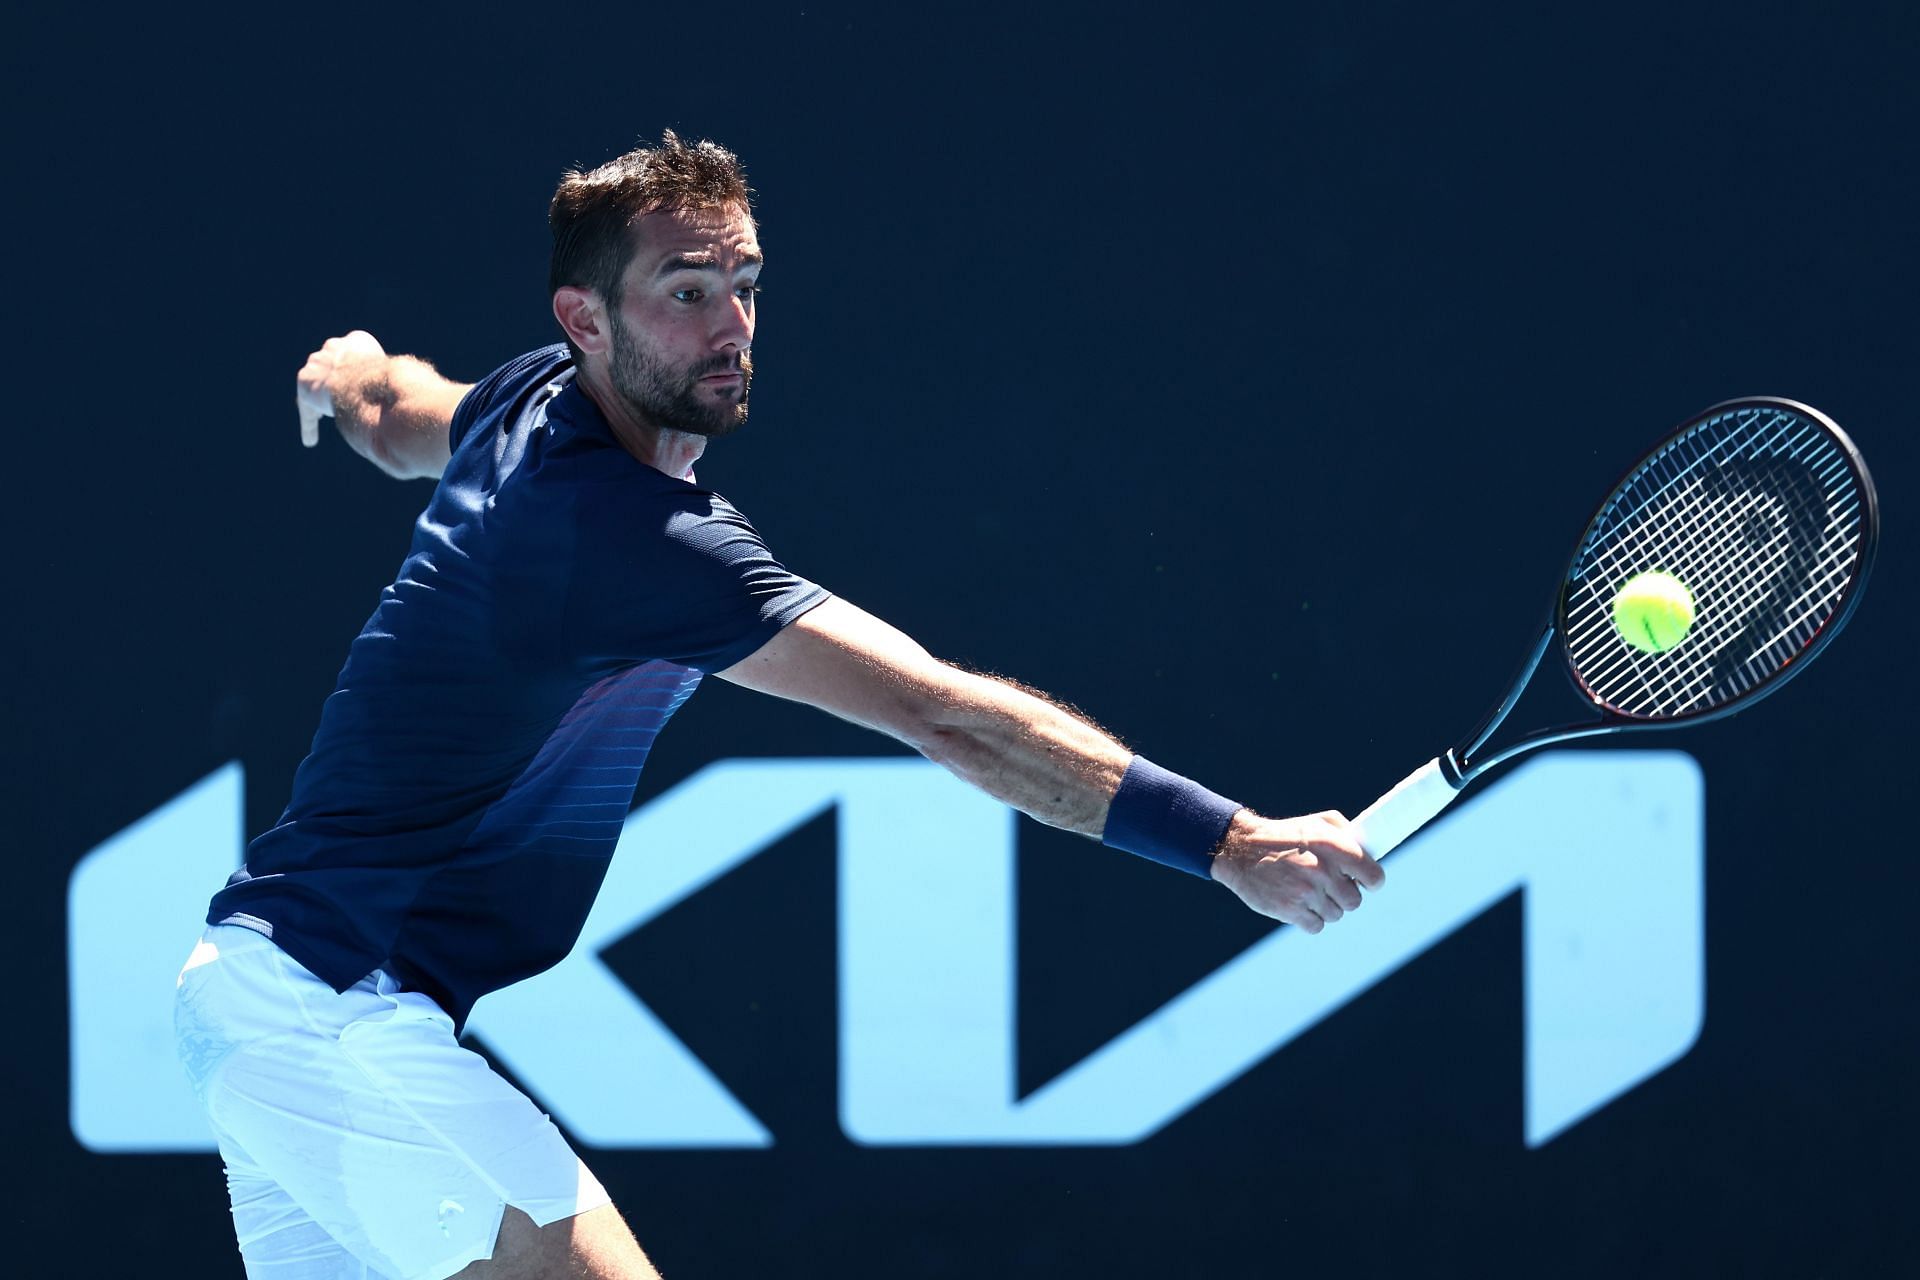 Marin Cilic in action at the 2022 Australian Open